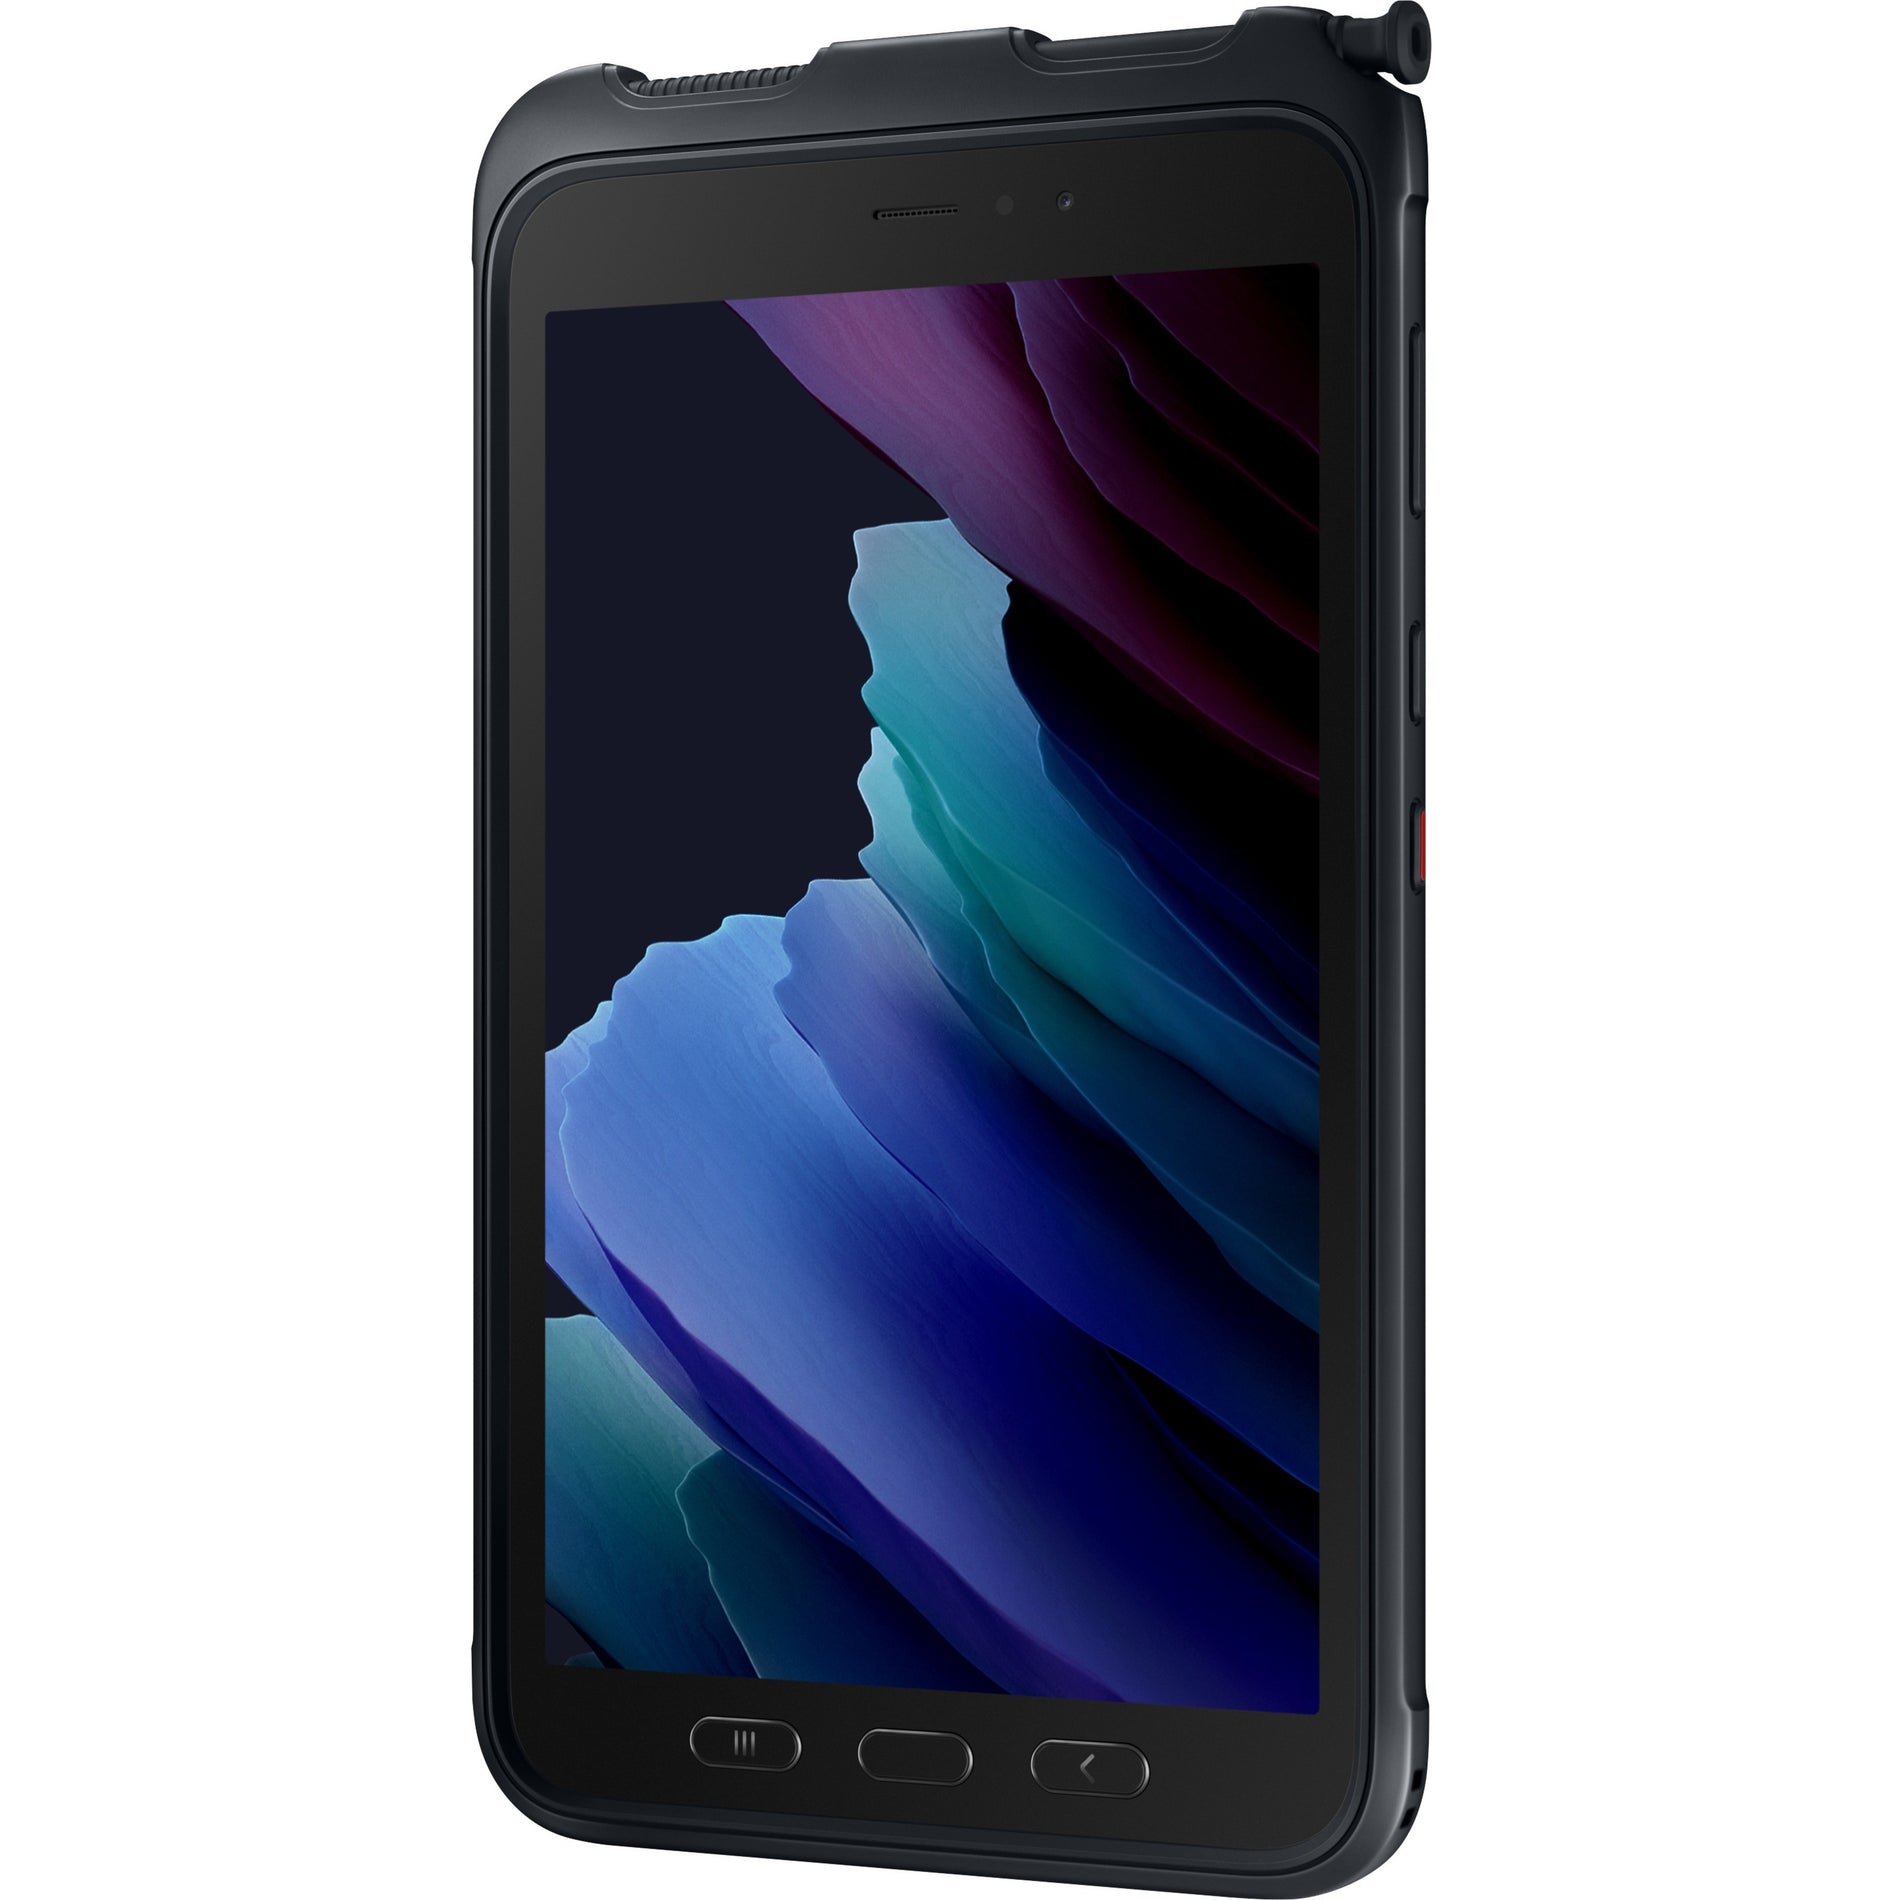 Samsung Galaxy Tab Active3 Rugged Tablet - 8" WUXGA - Octa-core (8 Core) 2.70 GHz 1.70 GHz - 4 GB RAM - 128 GB Storage - Android 10 - 4G - Black (SM-T577UZKGN14) Main image